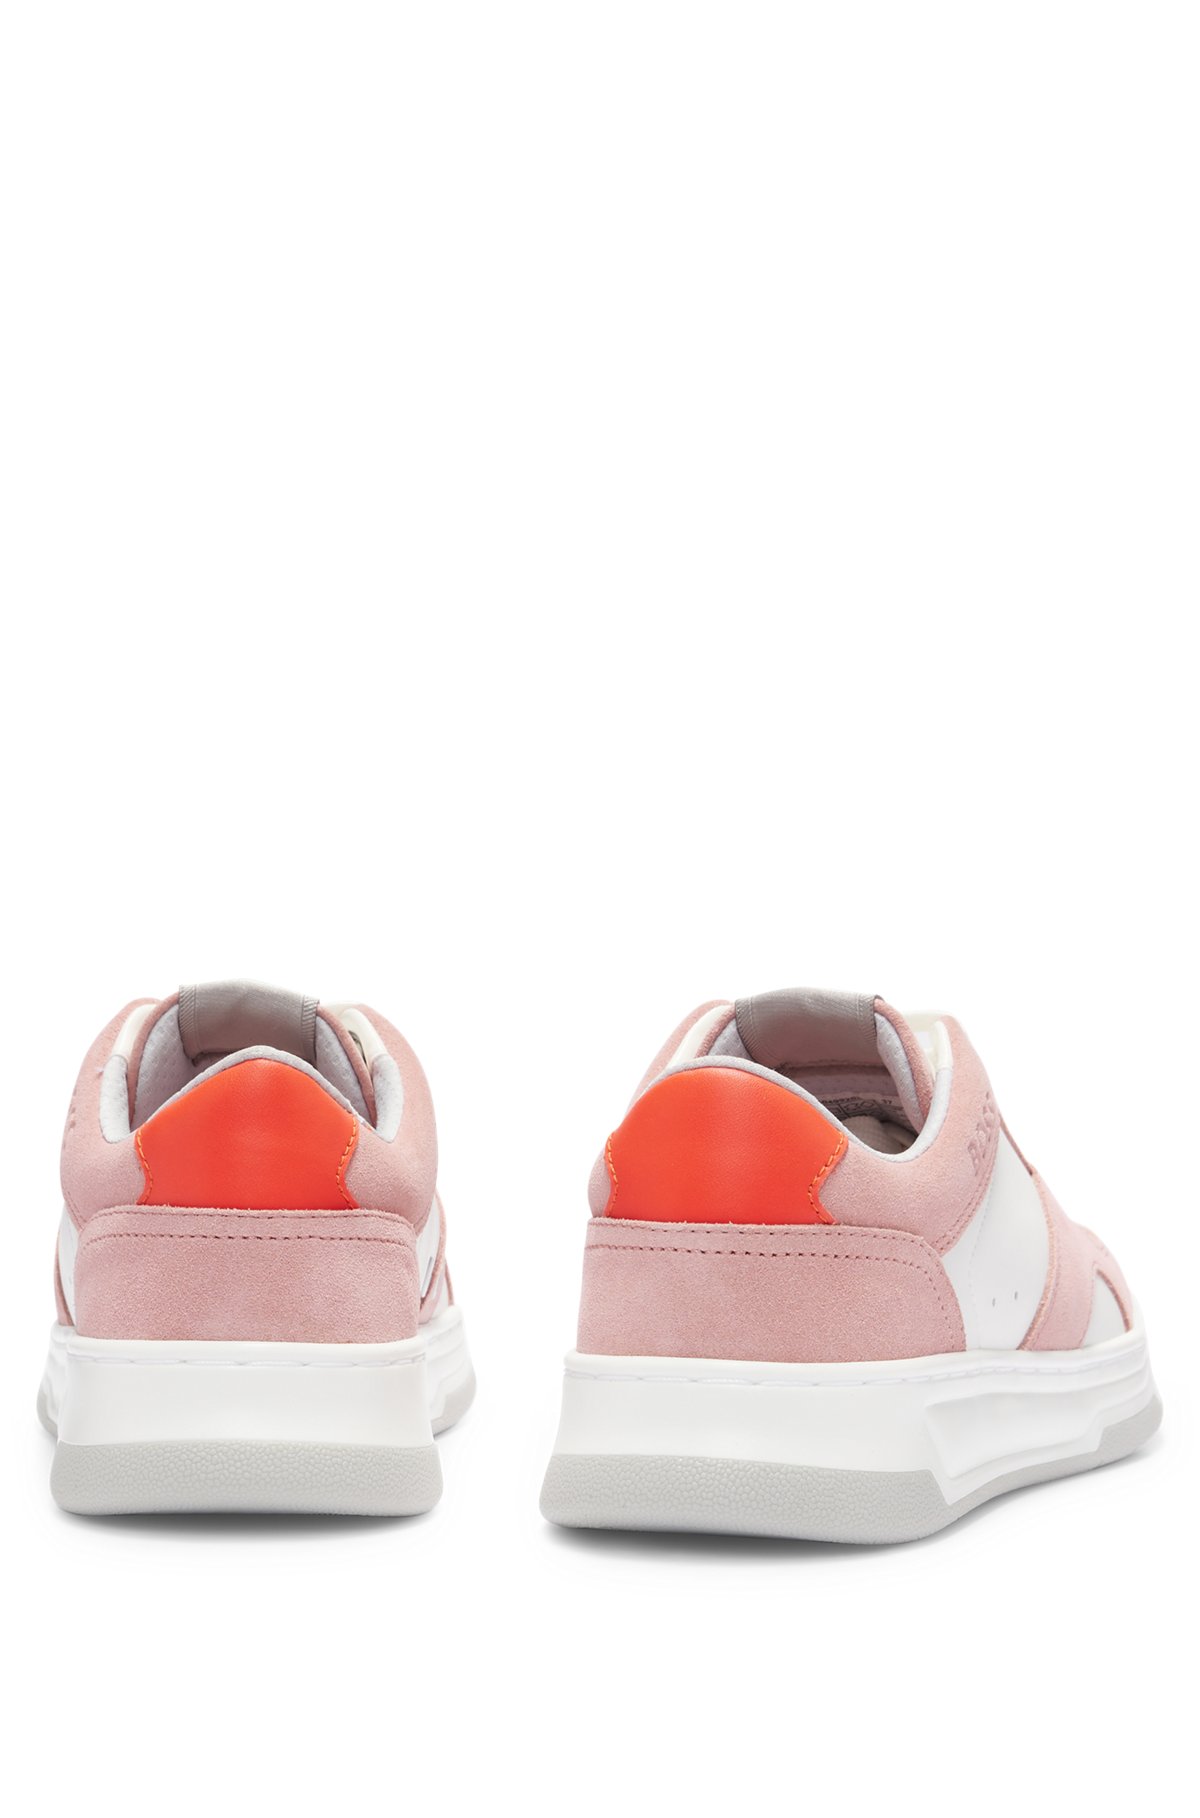 Basketball-style trainers in mixed materials with branded accents, light pink